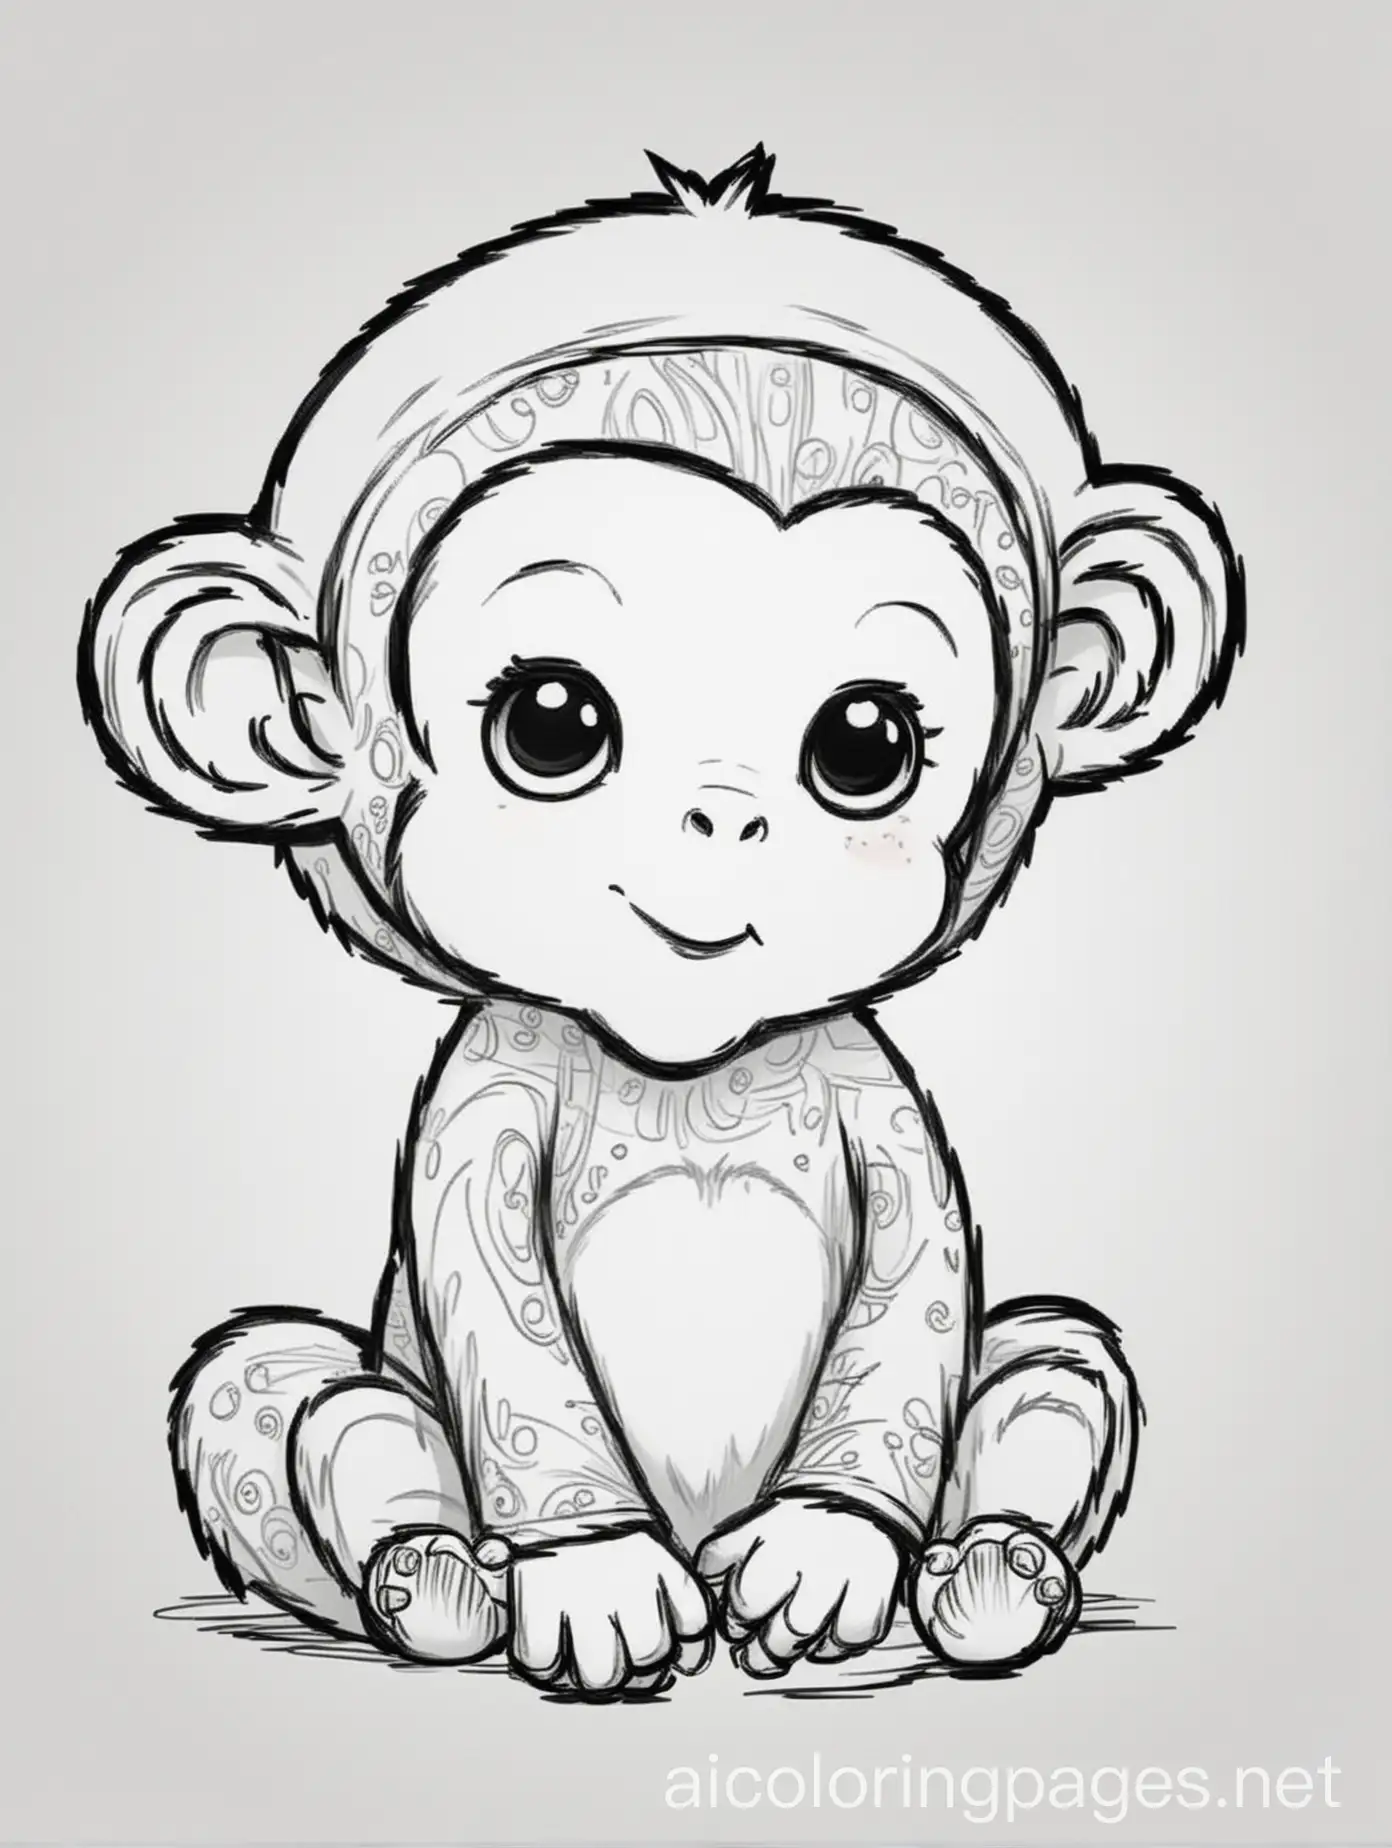 Adorable-Monkey-surrounded-by-Toys-Coloring-Page-for-Kids